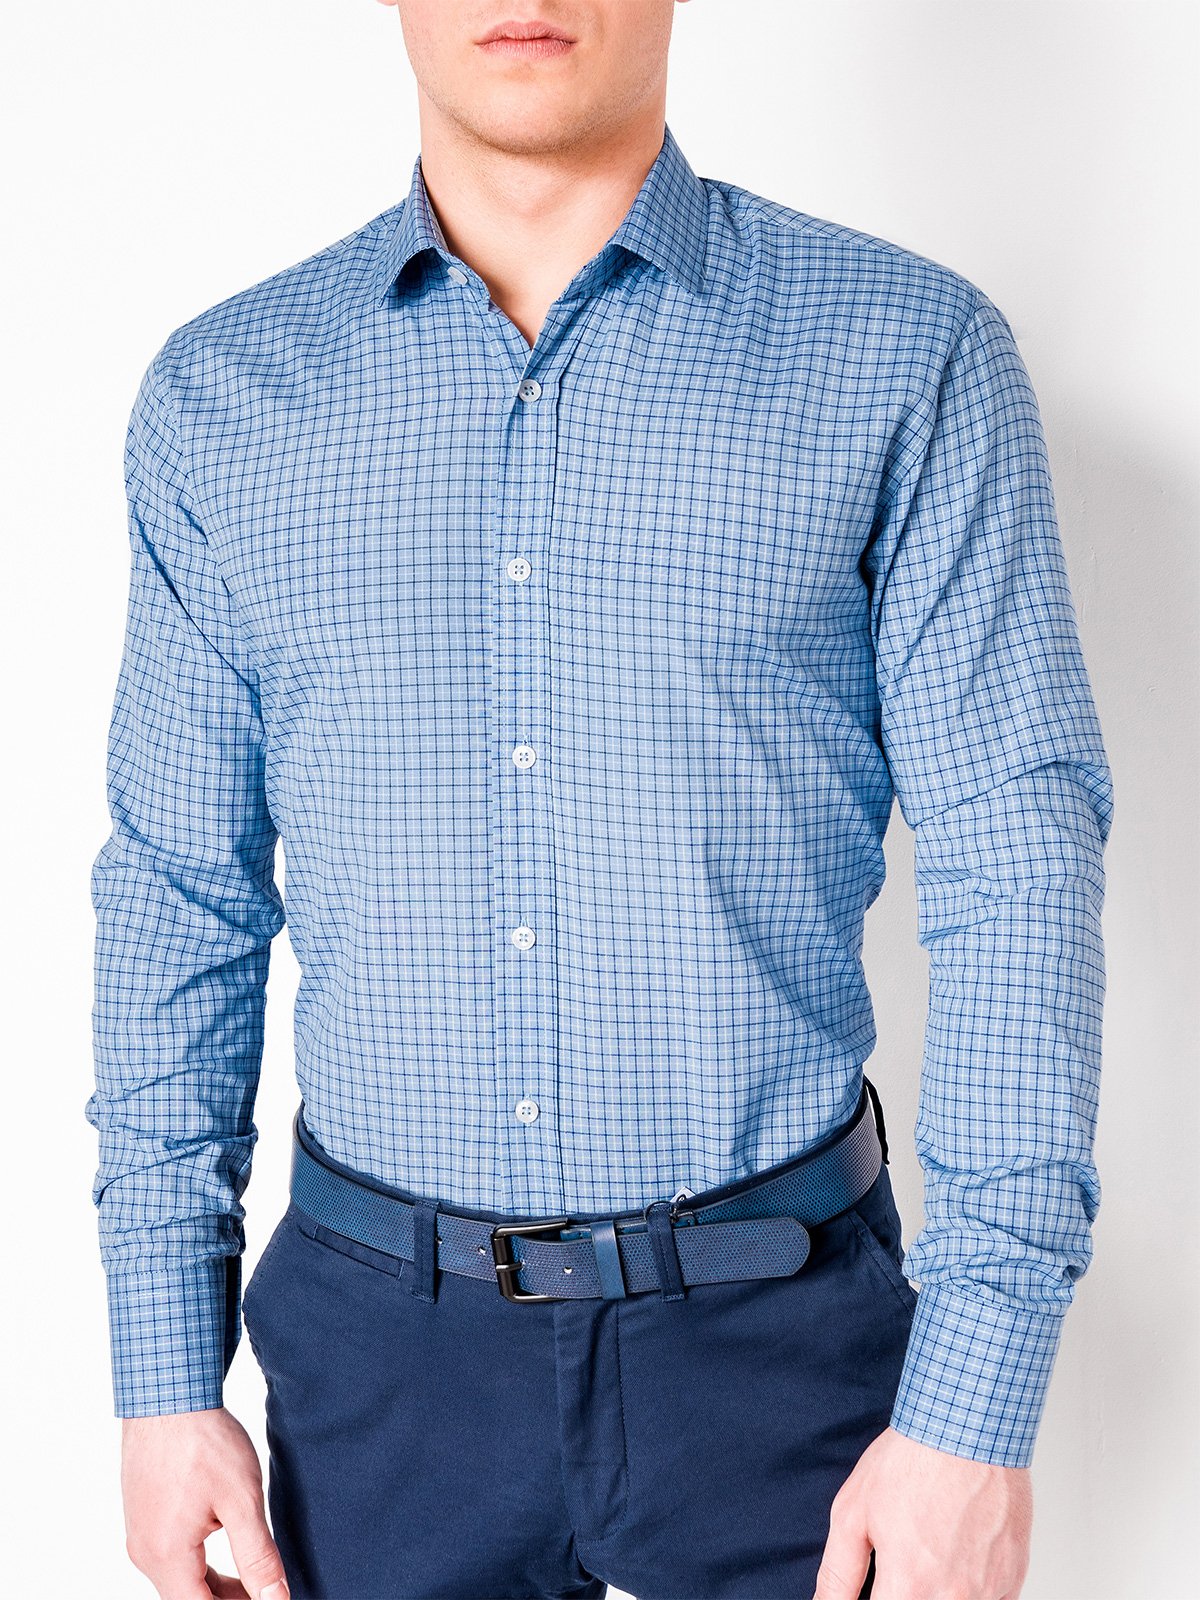 Men's check shirt with long sleeves K434 - light blue | MODONE ...